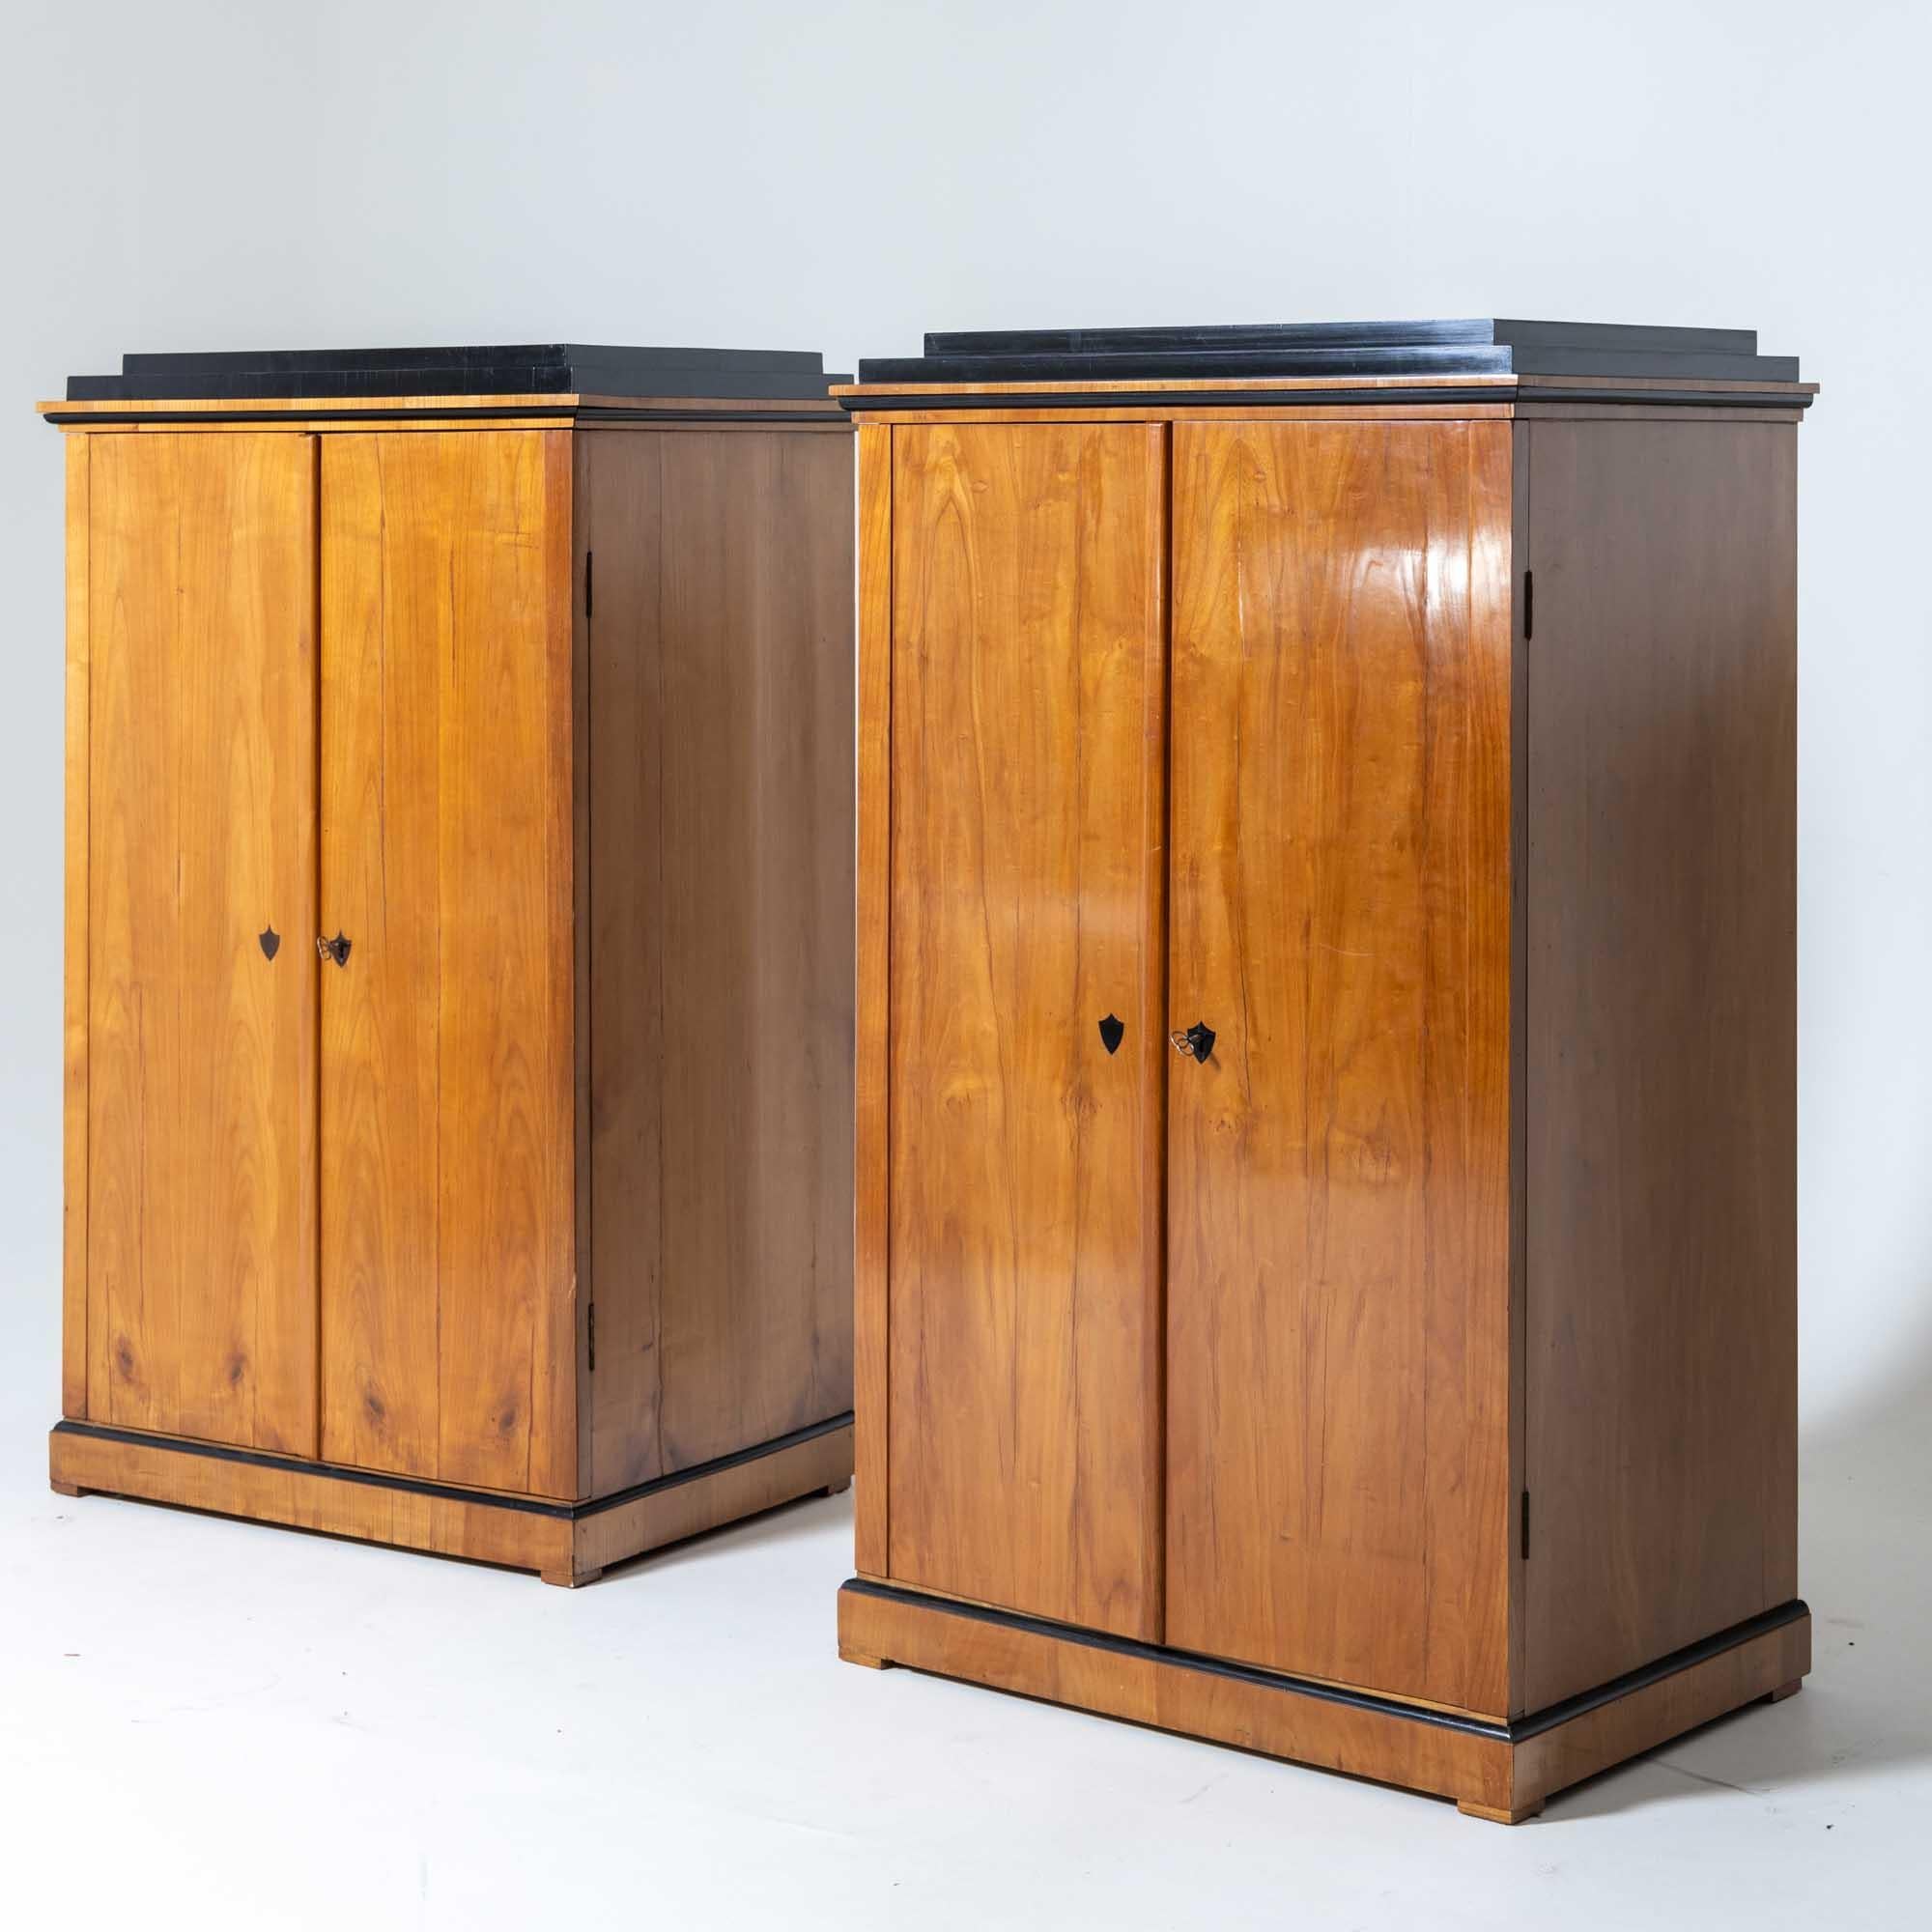 Veneer Pair of Biedermeier Collection Cabinets, Germany, probably Munich, c. 1820